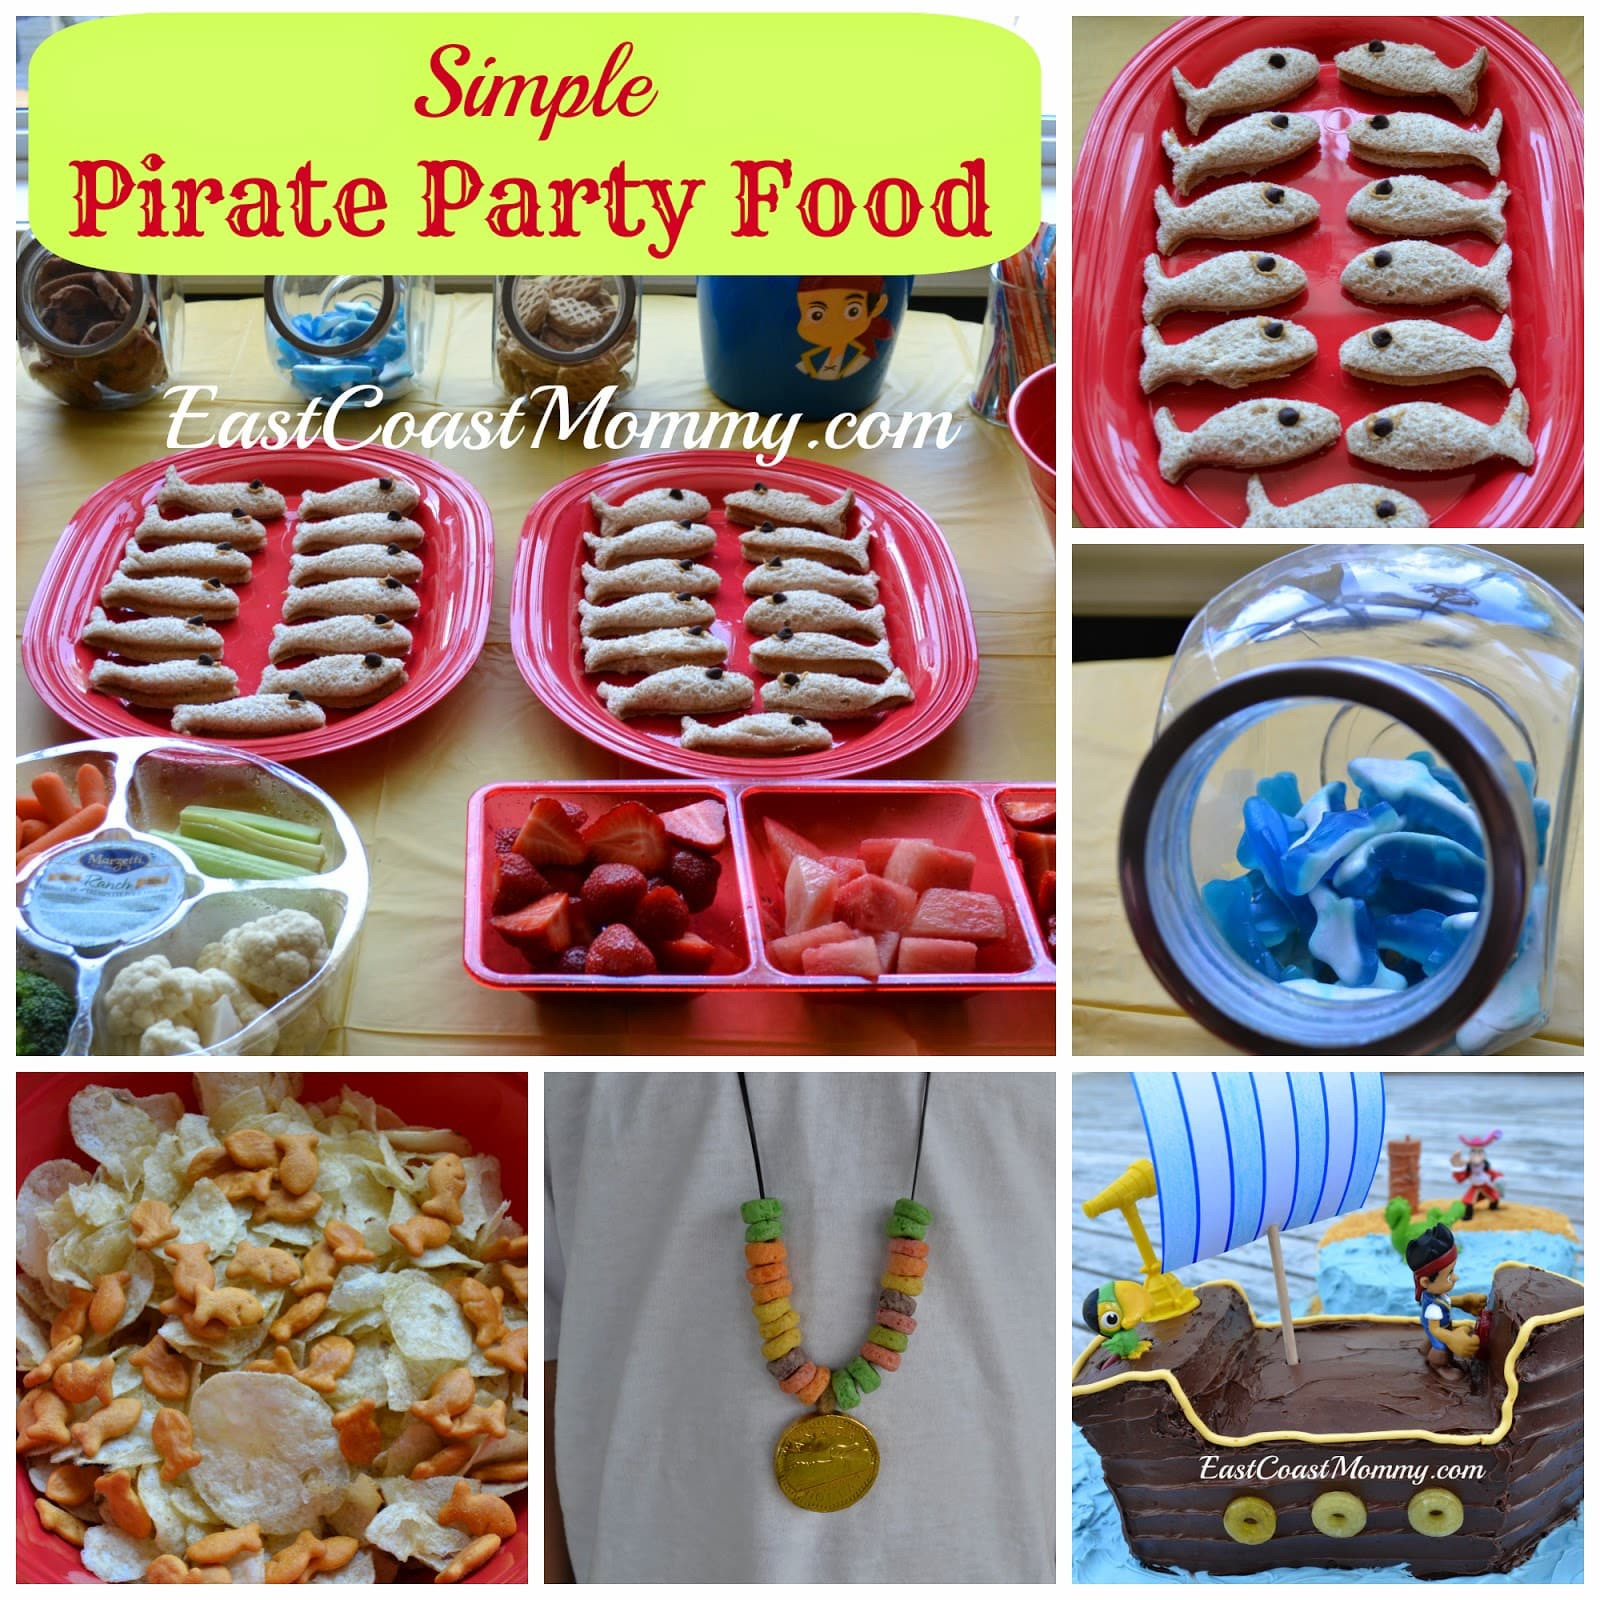 Pirates Party Food Ideas
 Everything you need to host a perfect Pirate Party